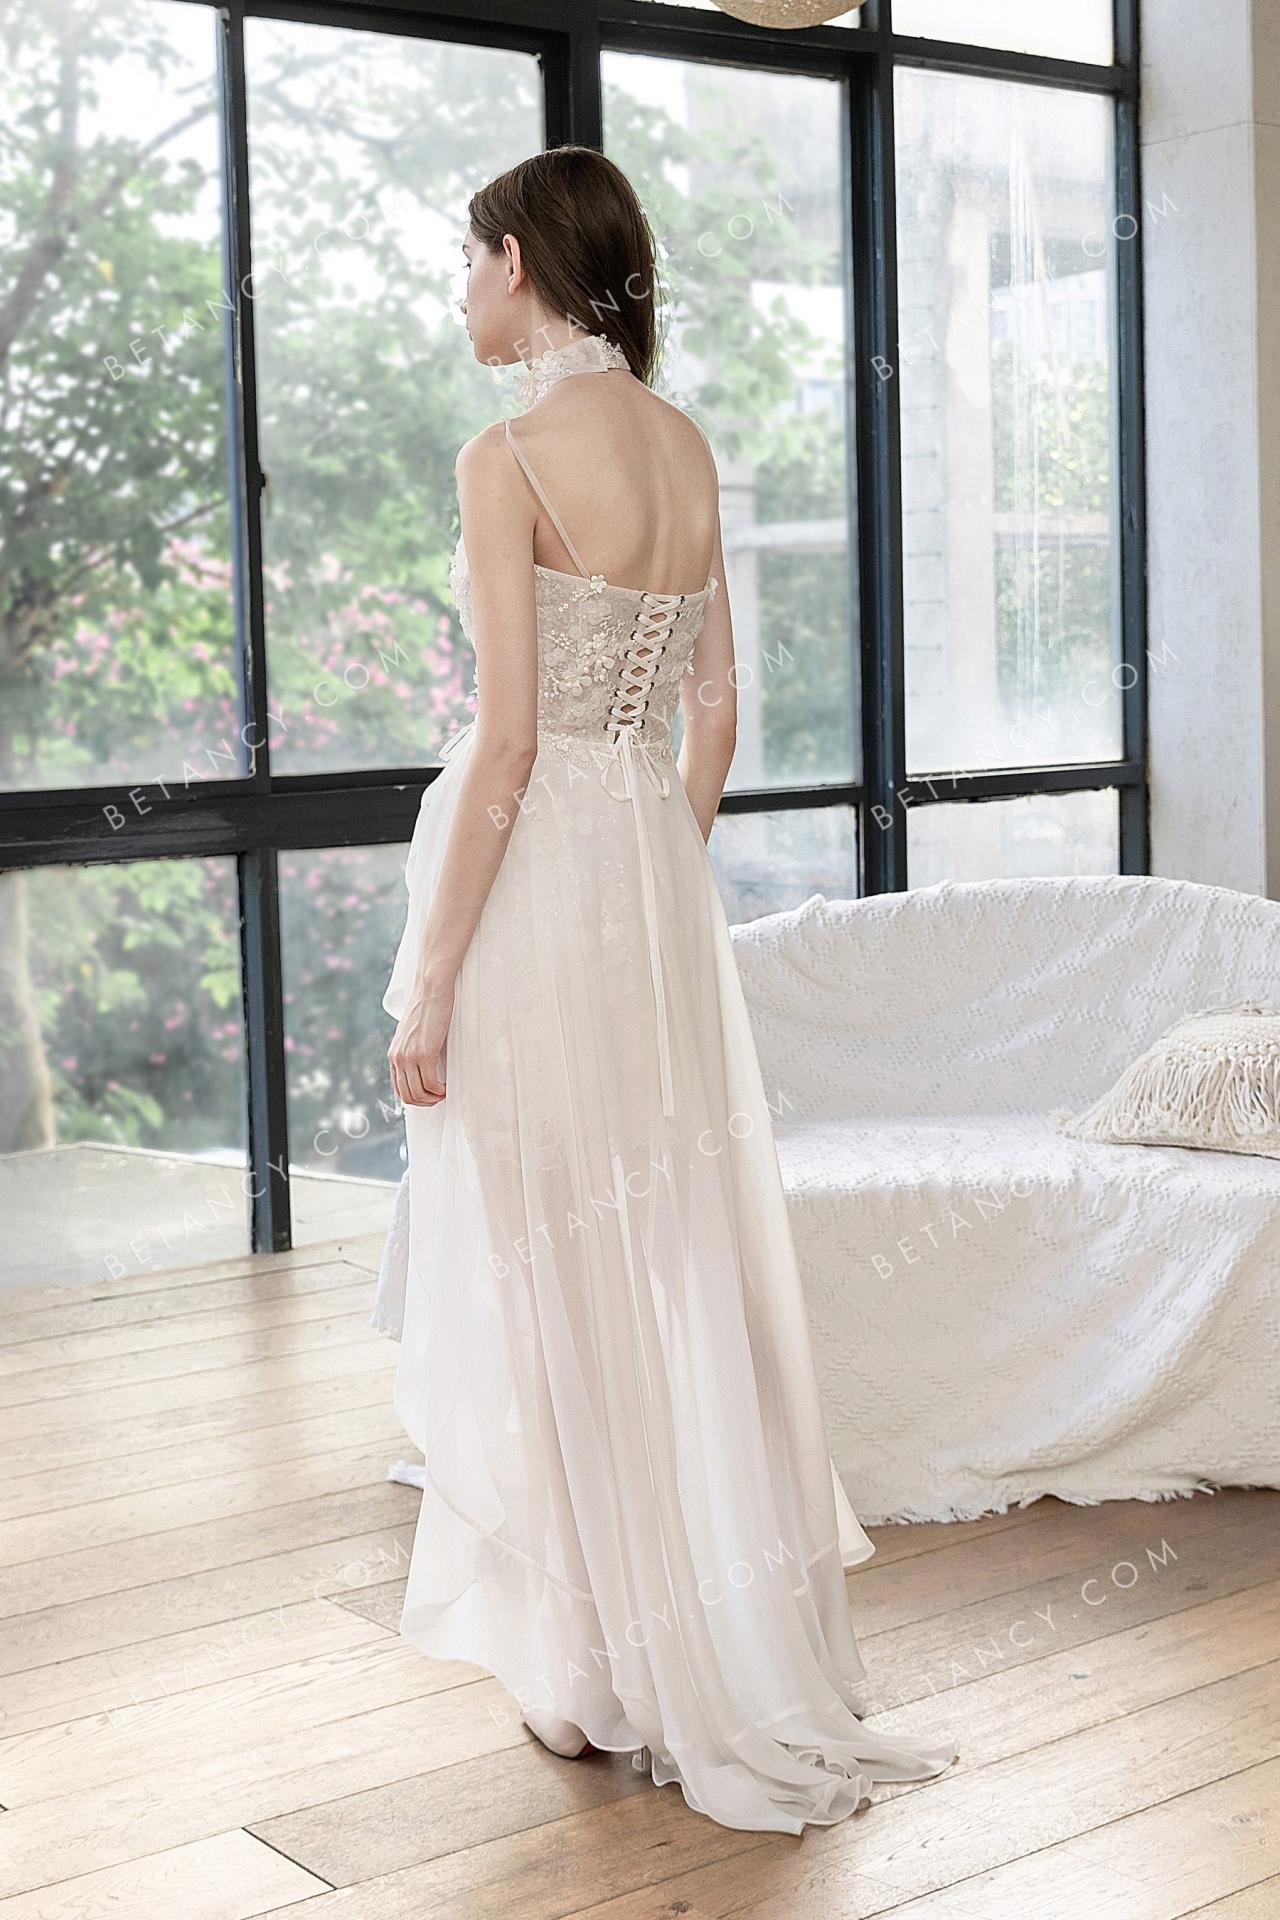 Flowers top with lace up back chiffon overskirt wedding dress 3